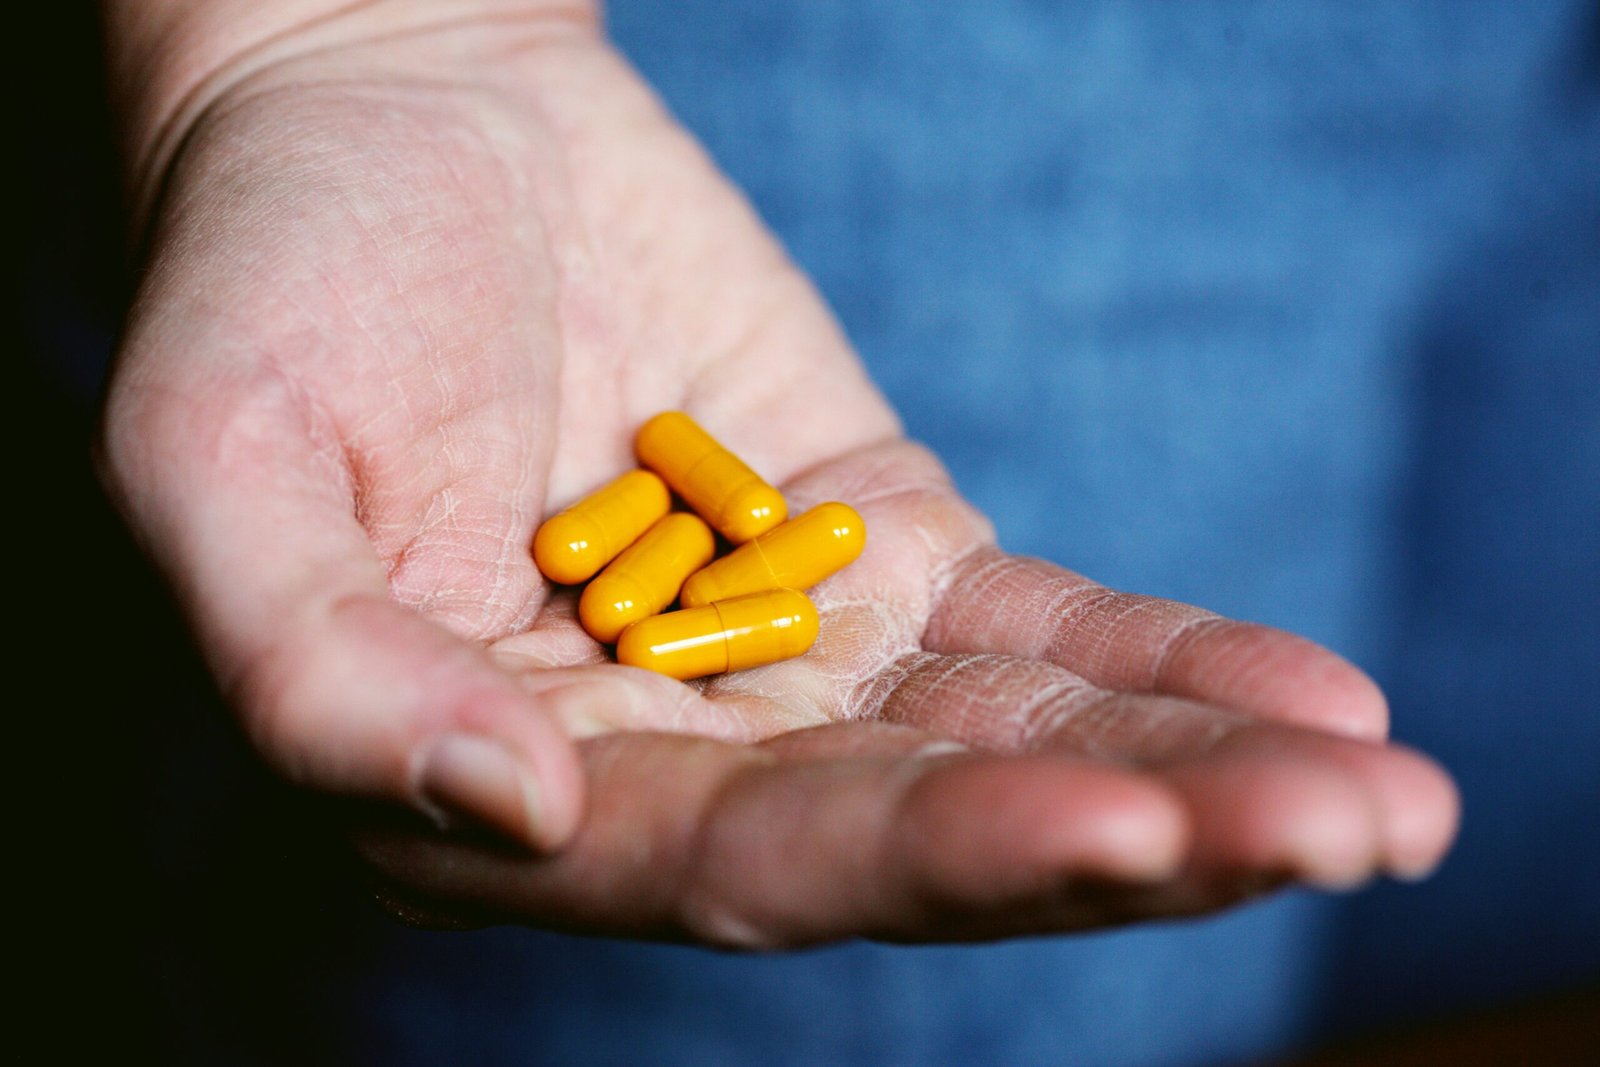 yellow medication pill on persons hand